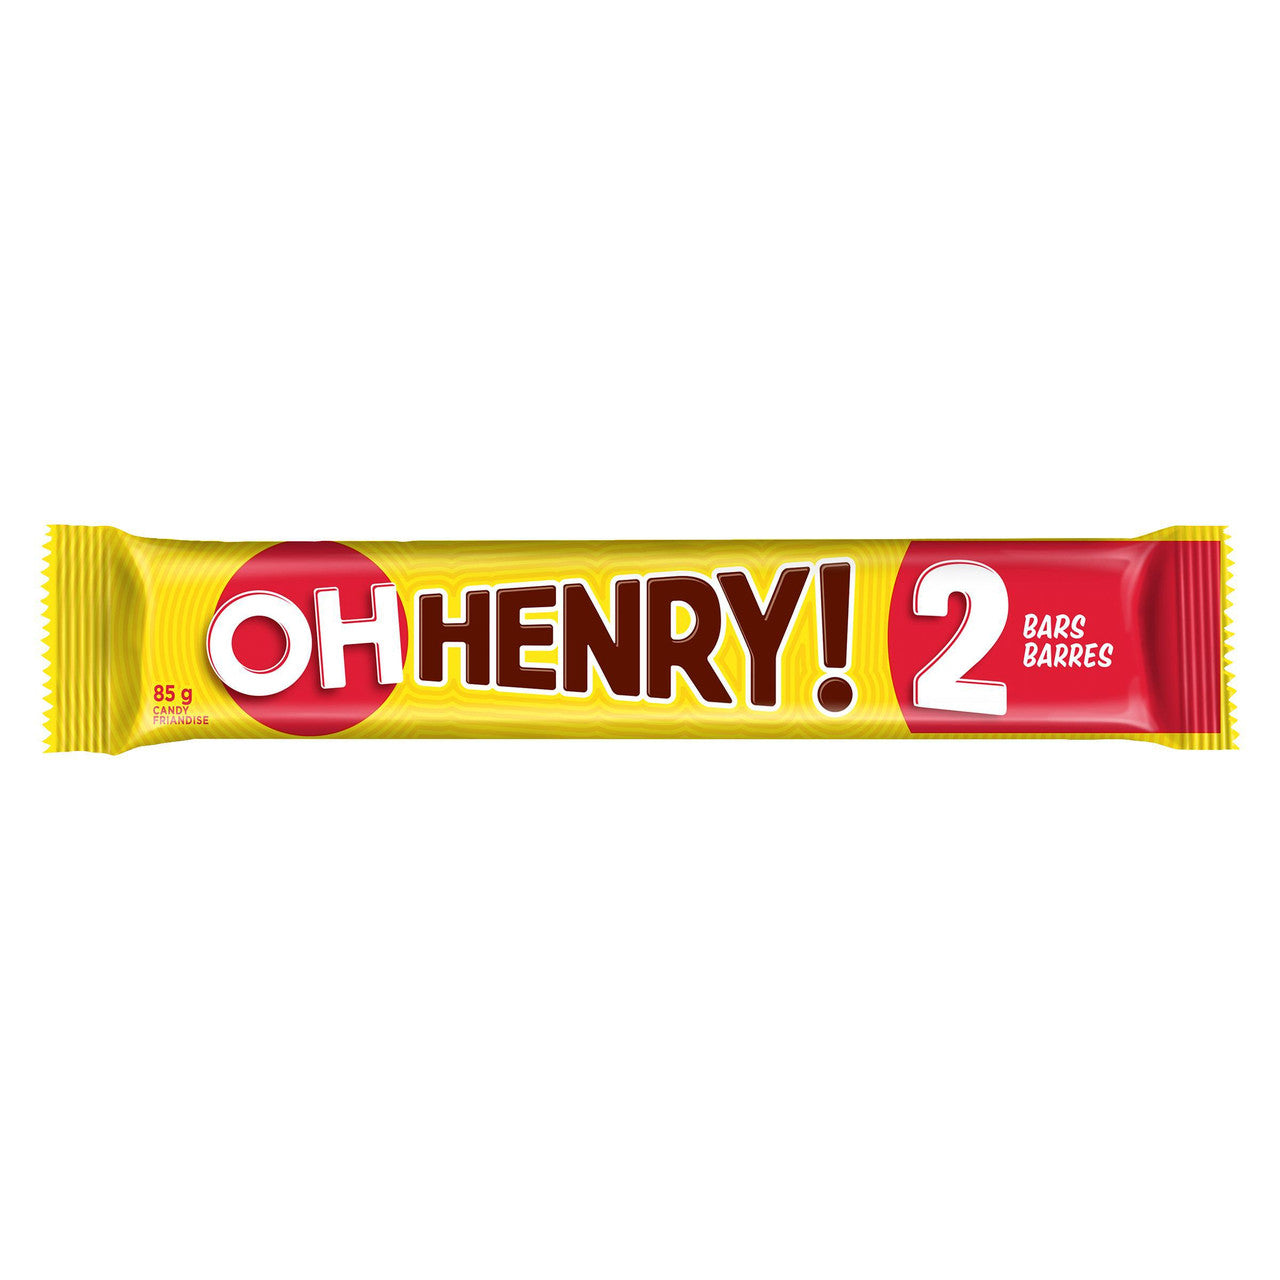 Oh Henry King Size Chocolate Bars 85g Each BAR The Great Taste of Canada Chocolate bar (24 Packs)